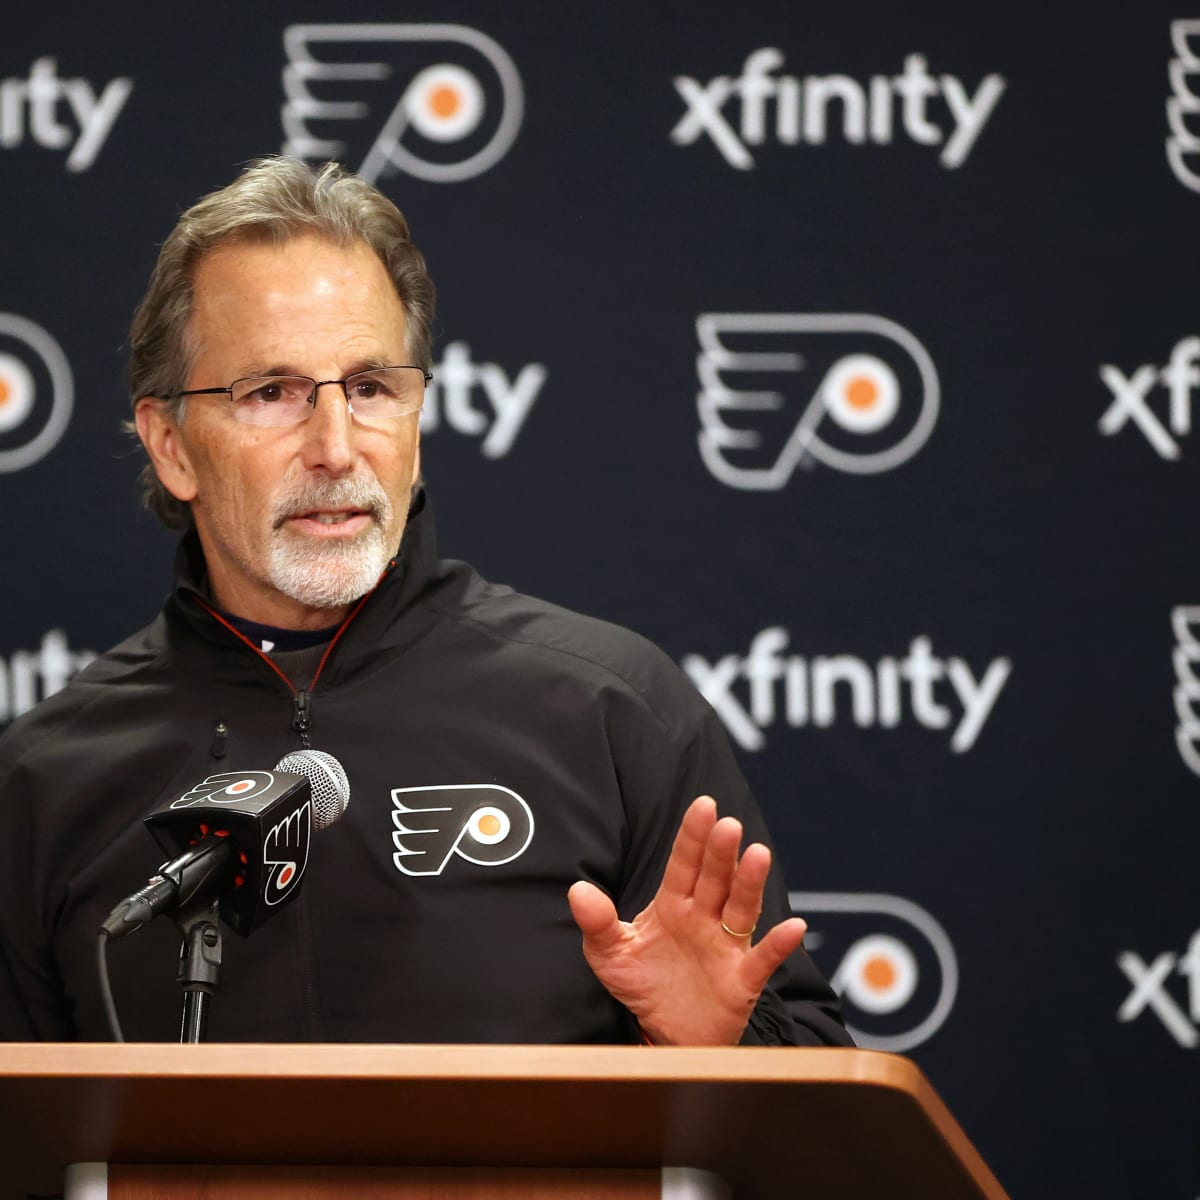 Flyers' coach John Tortorella claims Ivan Provorov 'did nothing